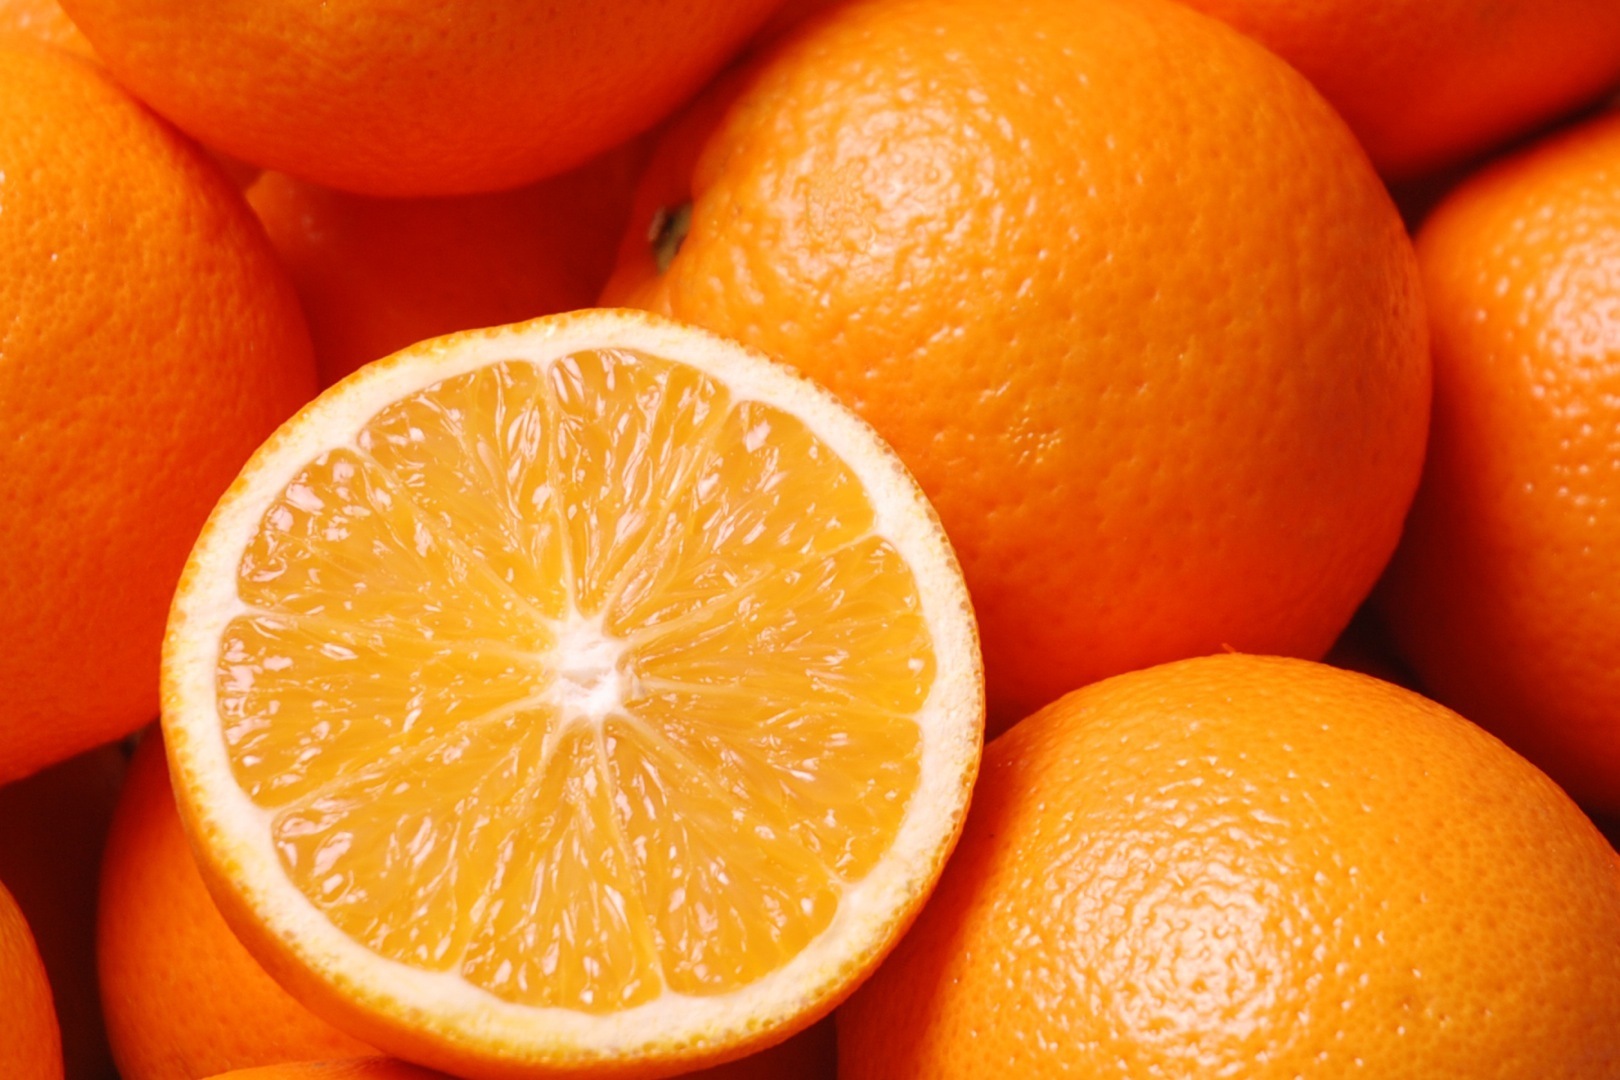 Eat some delicious oranges to get rid of hickeys